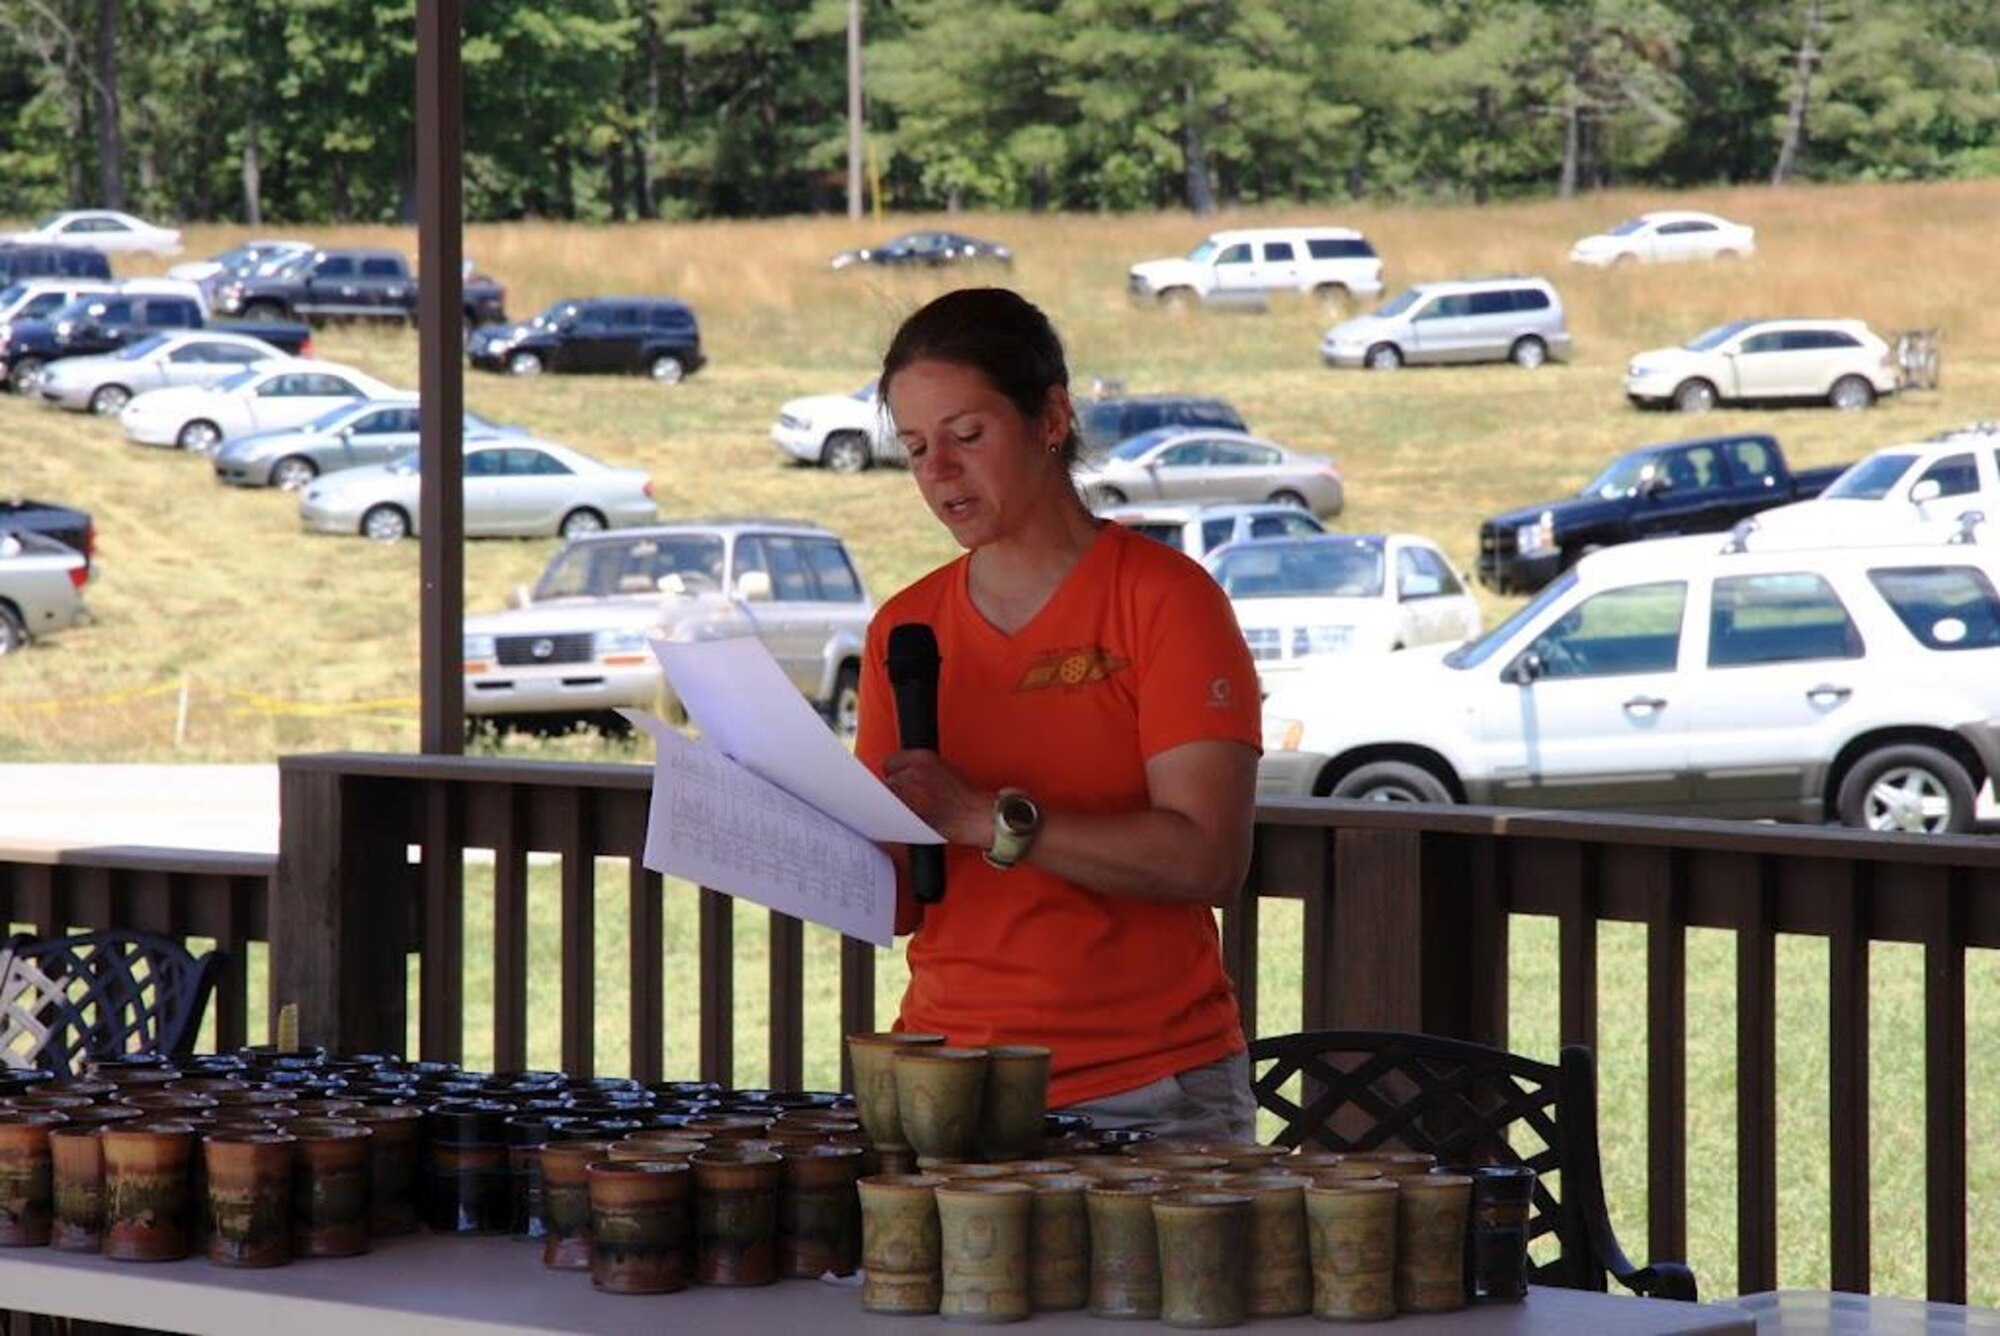 Race director Melissa Miller announces award winners at the conclusion of the 30th annual running of the Mach Tenn triathlon. (Photo provided)